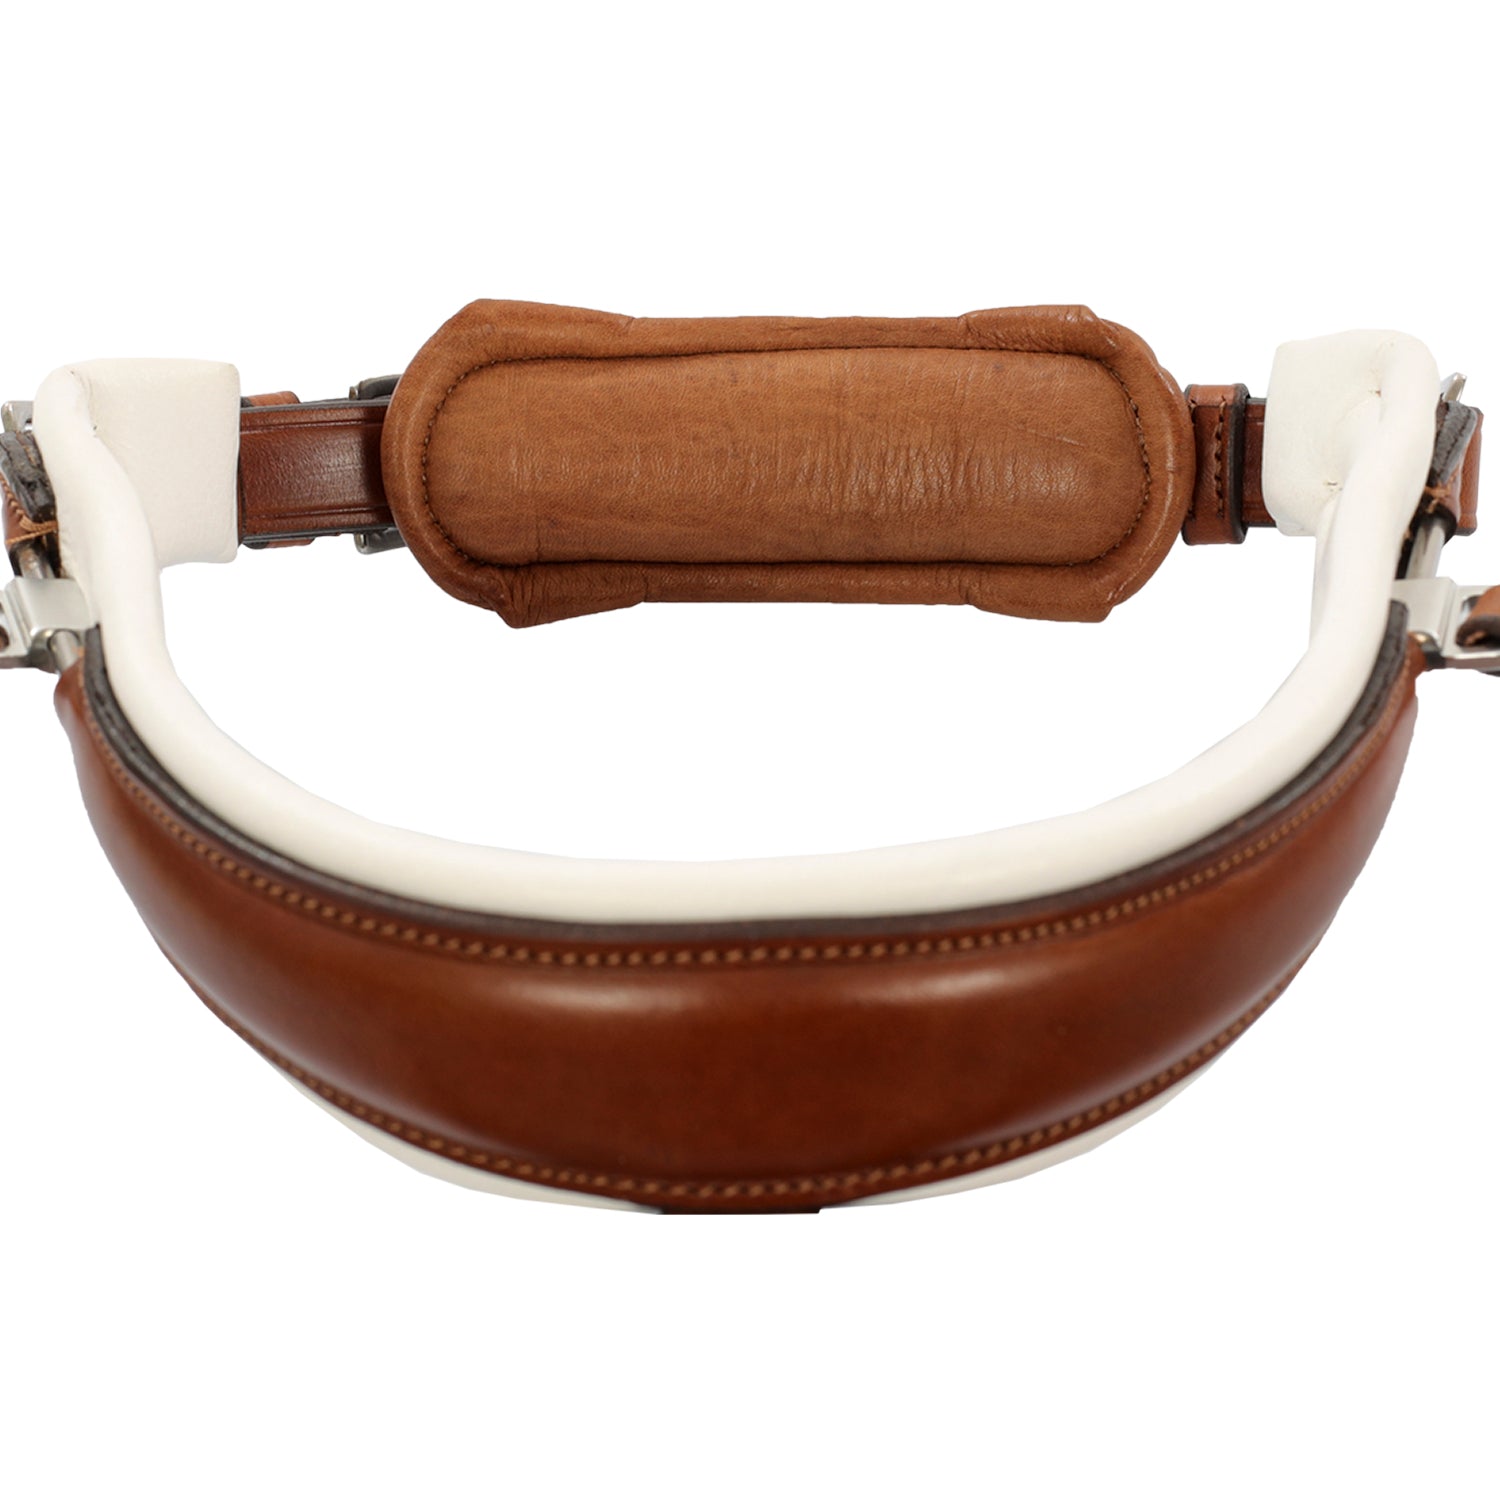 Tan dressage bridle with white padding